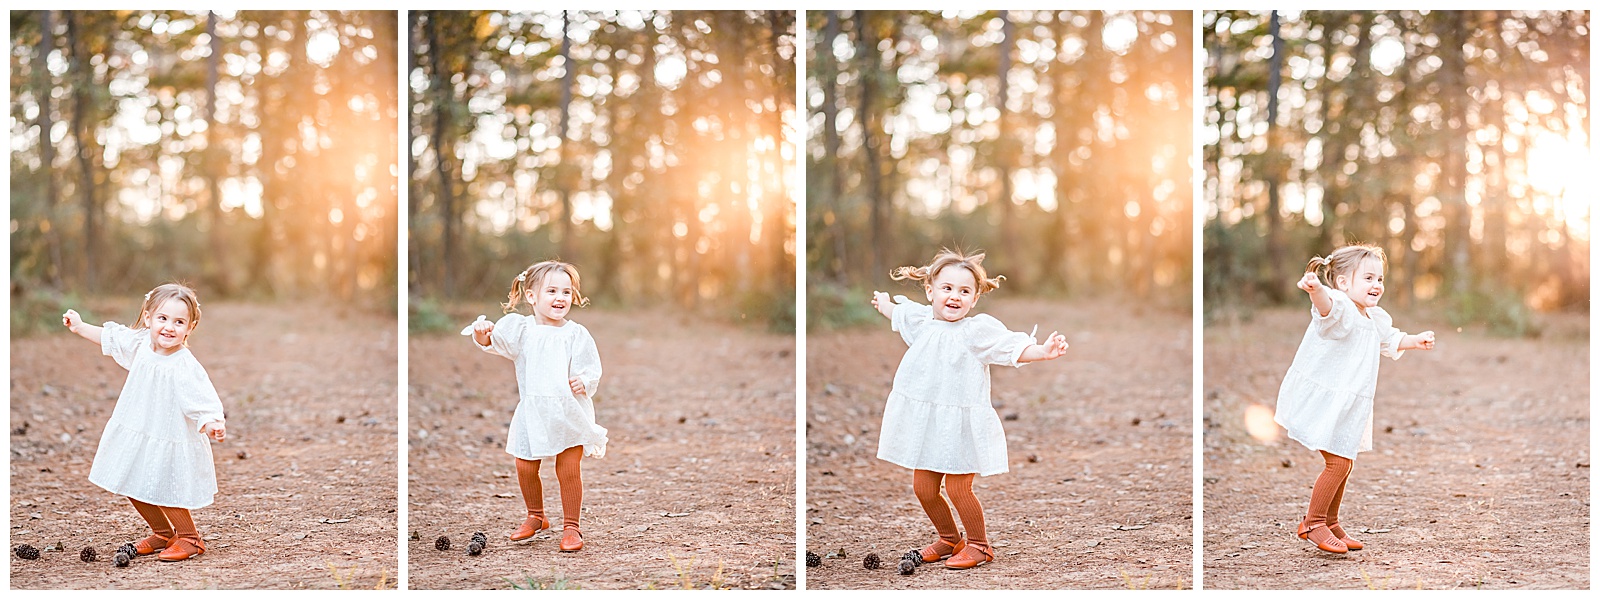 baby and child portraits The Woodlands Texas